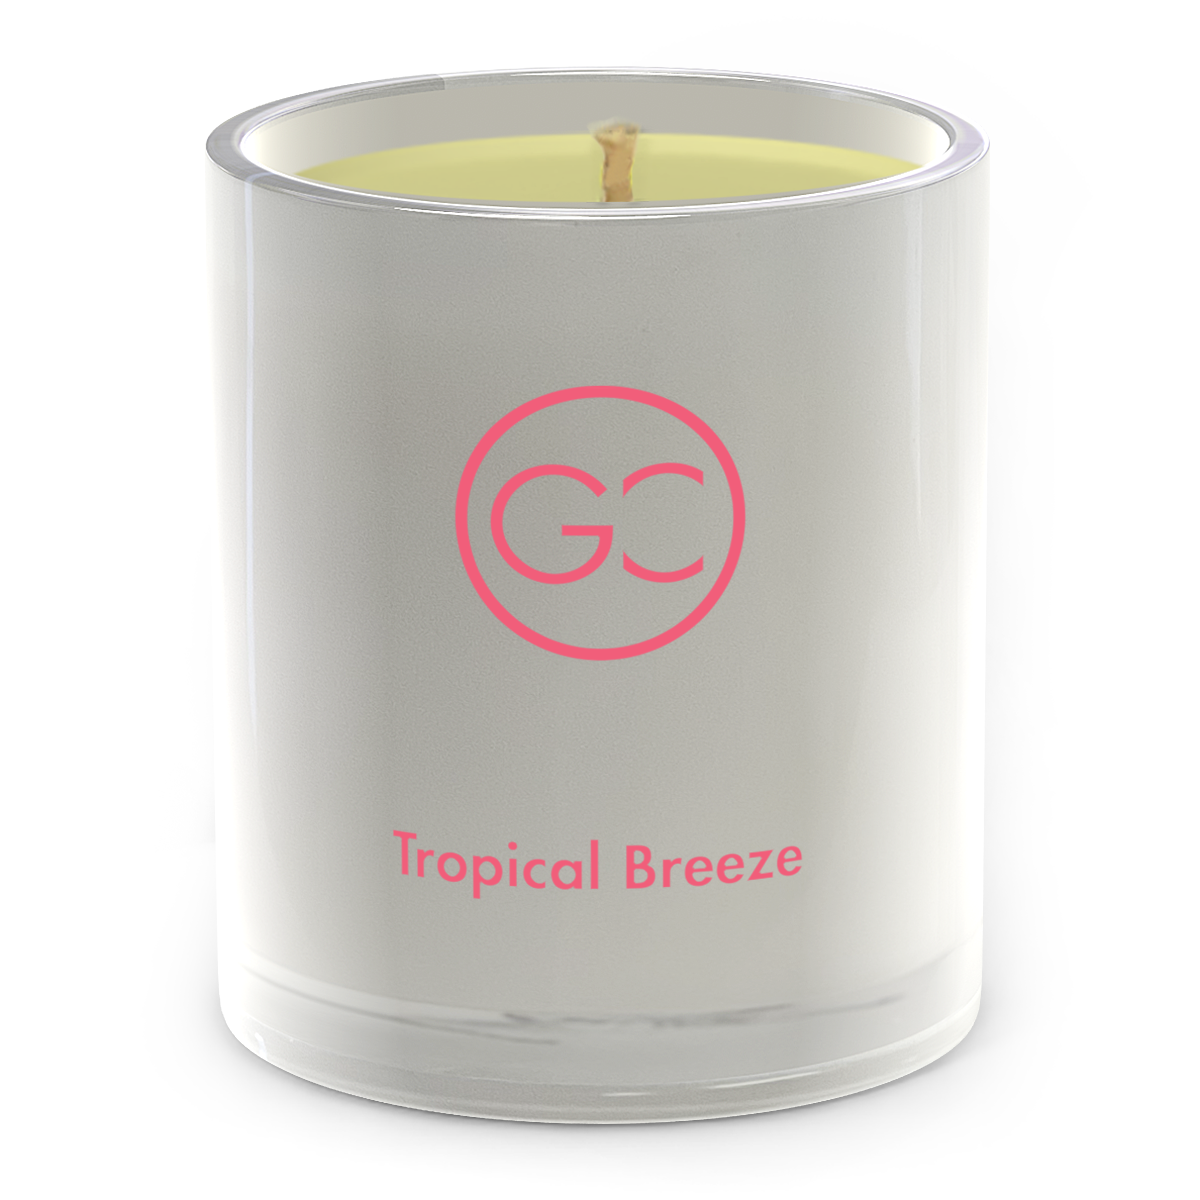 Tropical Breeze Scented Soy Candle 55hr Burn